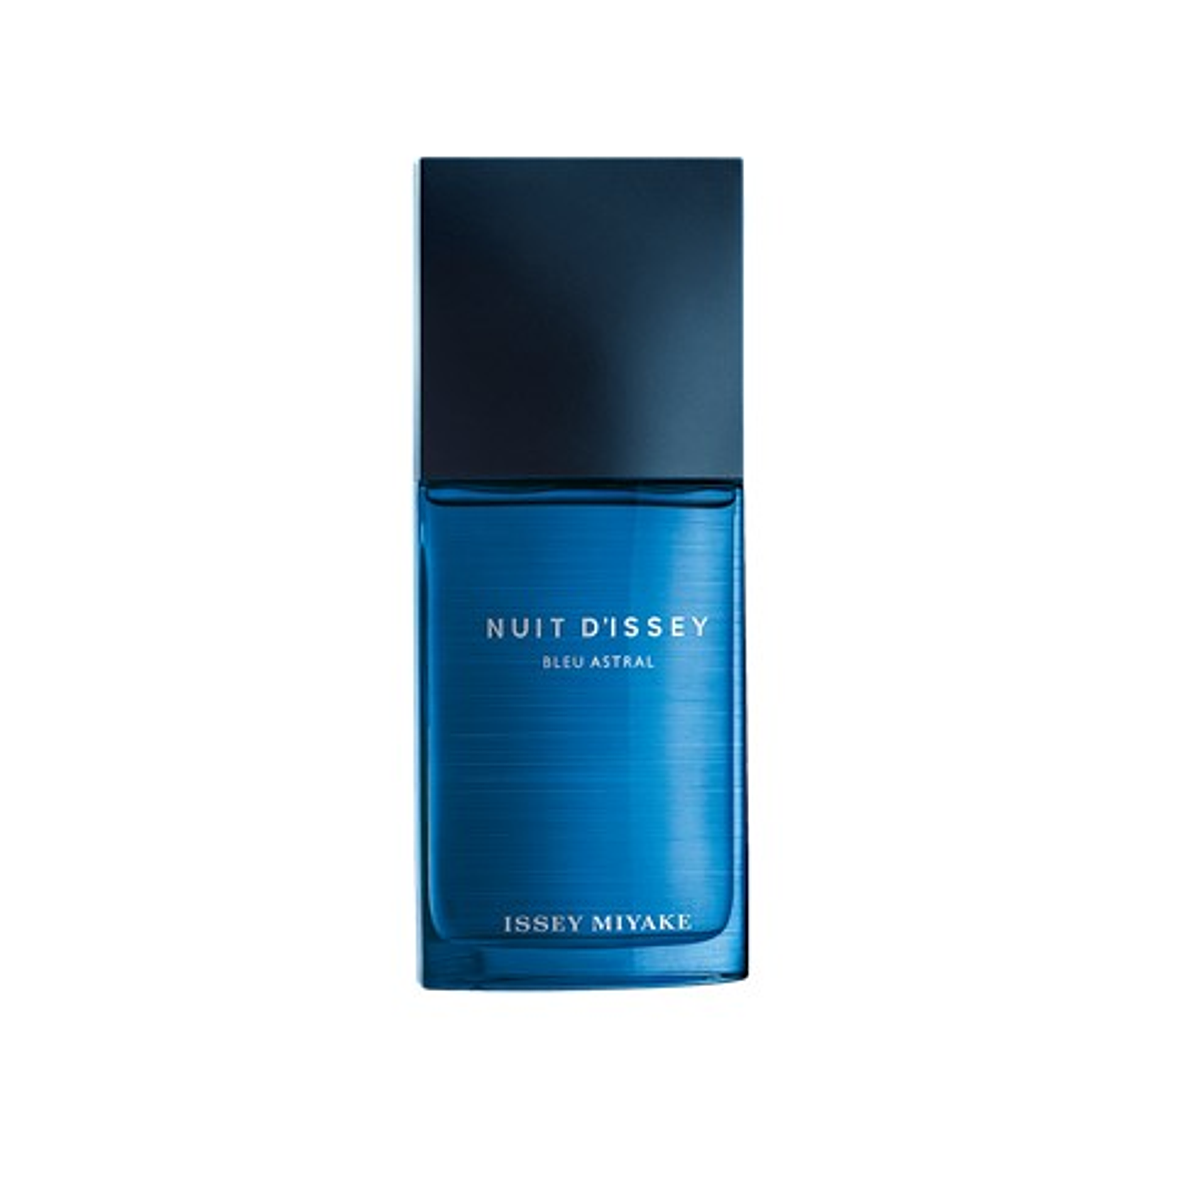 Issey Miyake Nuit d'Issey Bleu Astral EDT 125ml